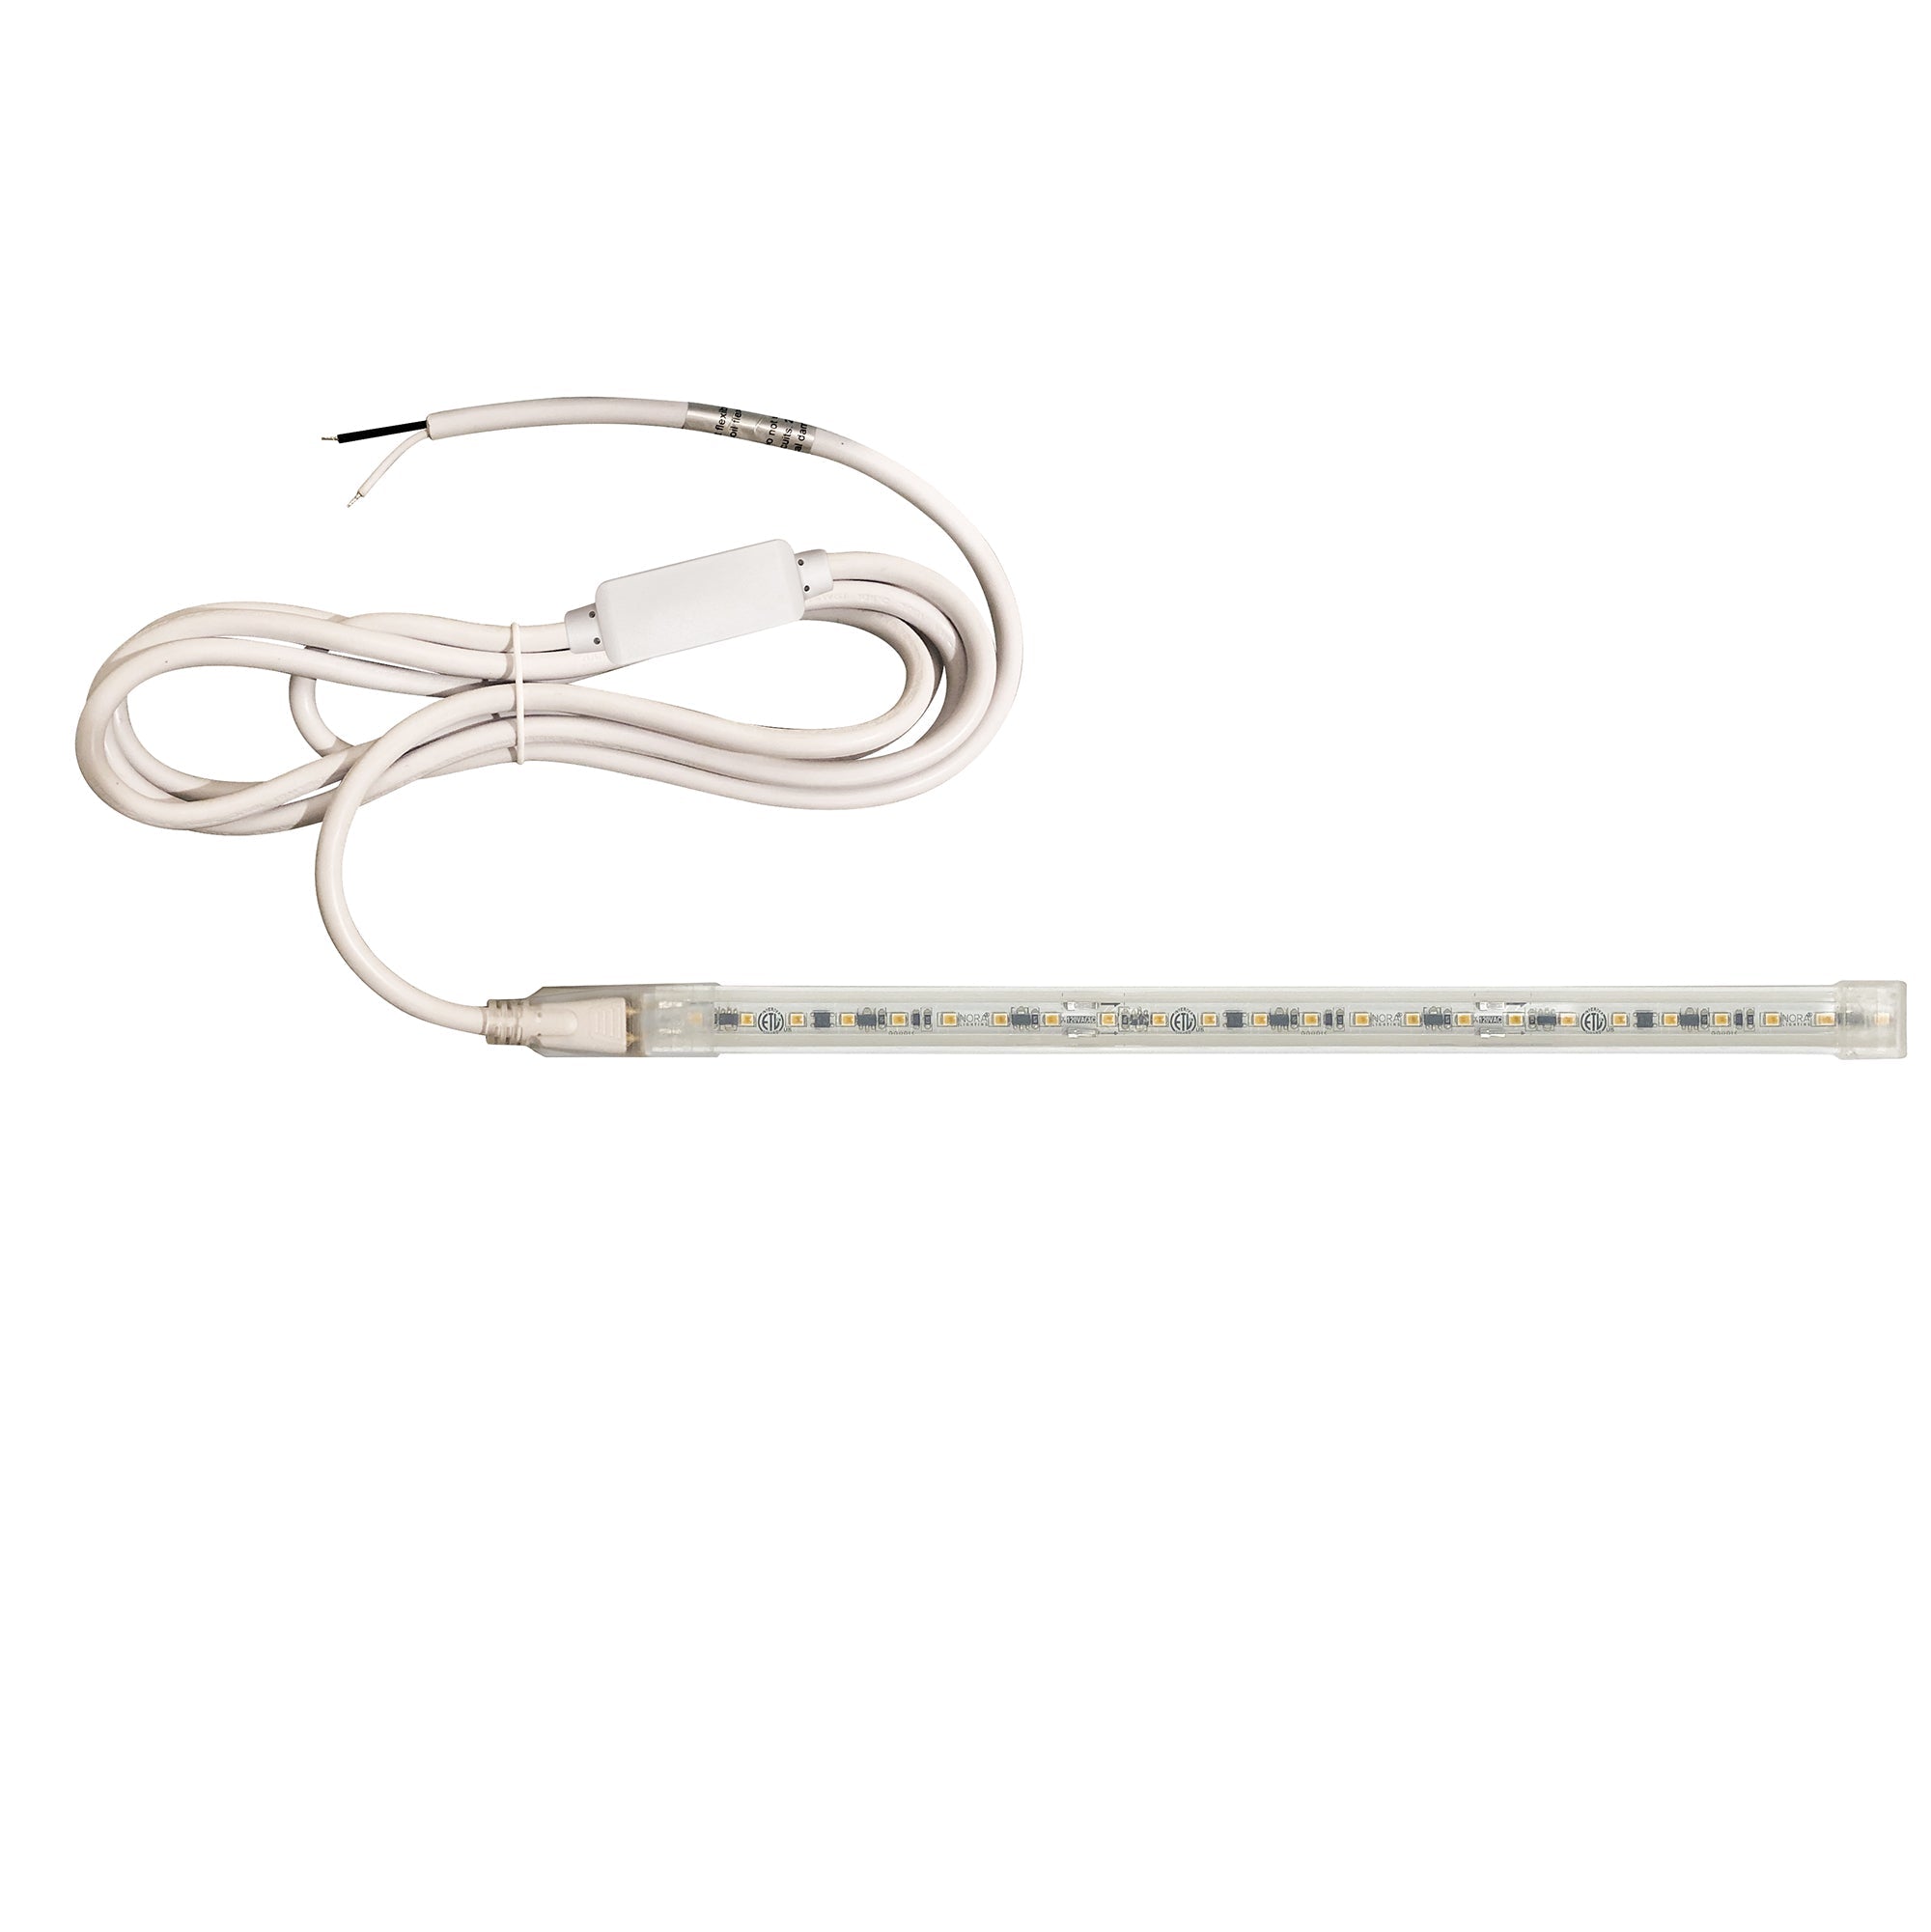 Nora Lighting NUTP13-W65-4-12-940/HWSP - Accent / Undercabinet - Custom Cut 65-ft, 4-in 120V Continuous LED Tape Light, 330lm / 3.6W per foot, 4000K, w/ Mounting Clips and 8' Hardwired Power Cord w/ Surge Protector